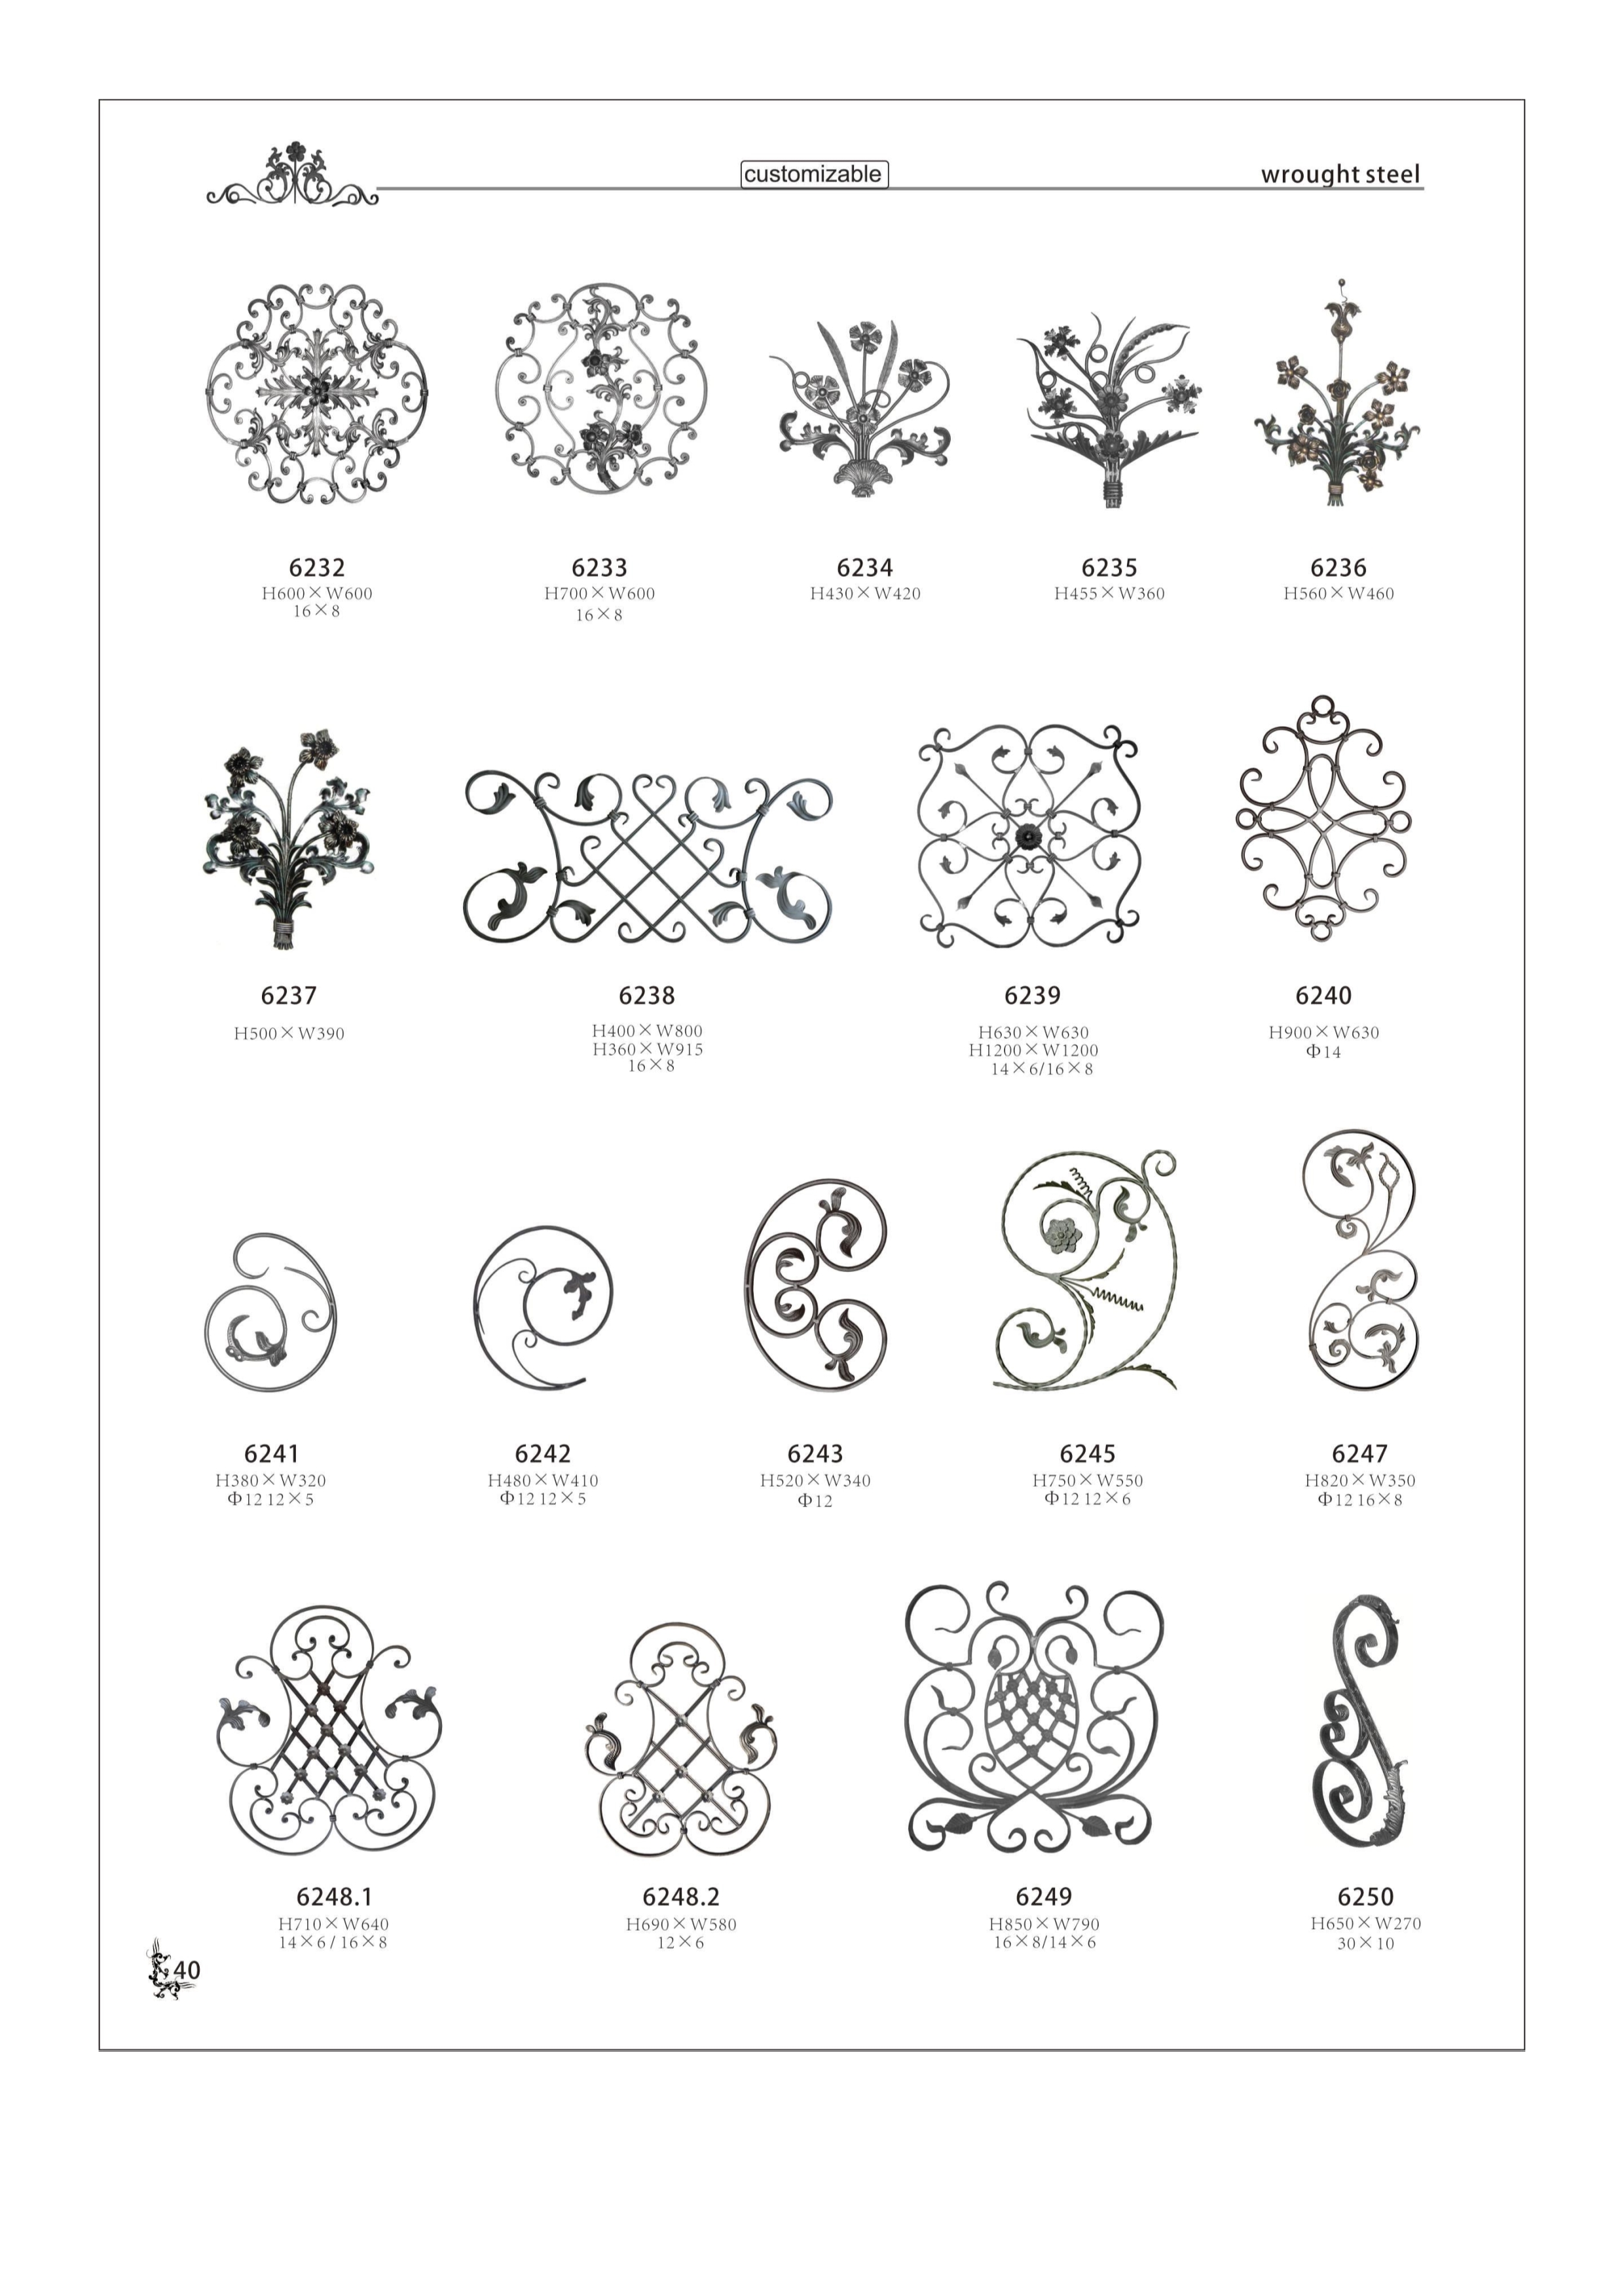 wrought steel ornaments Featured Image